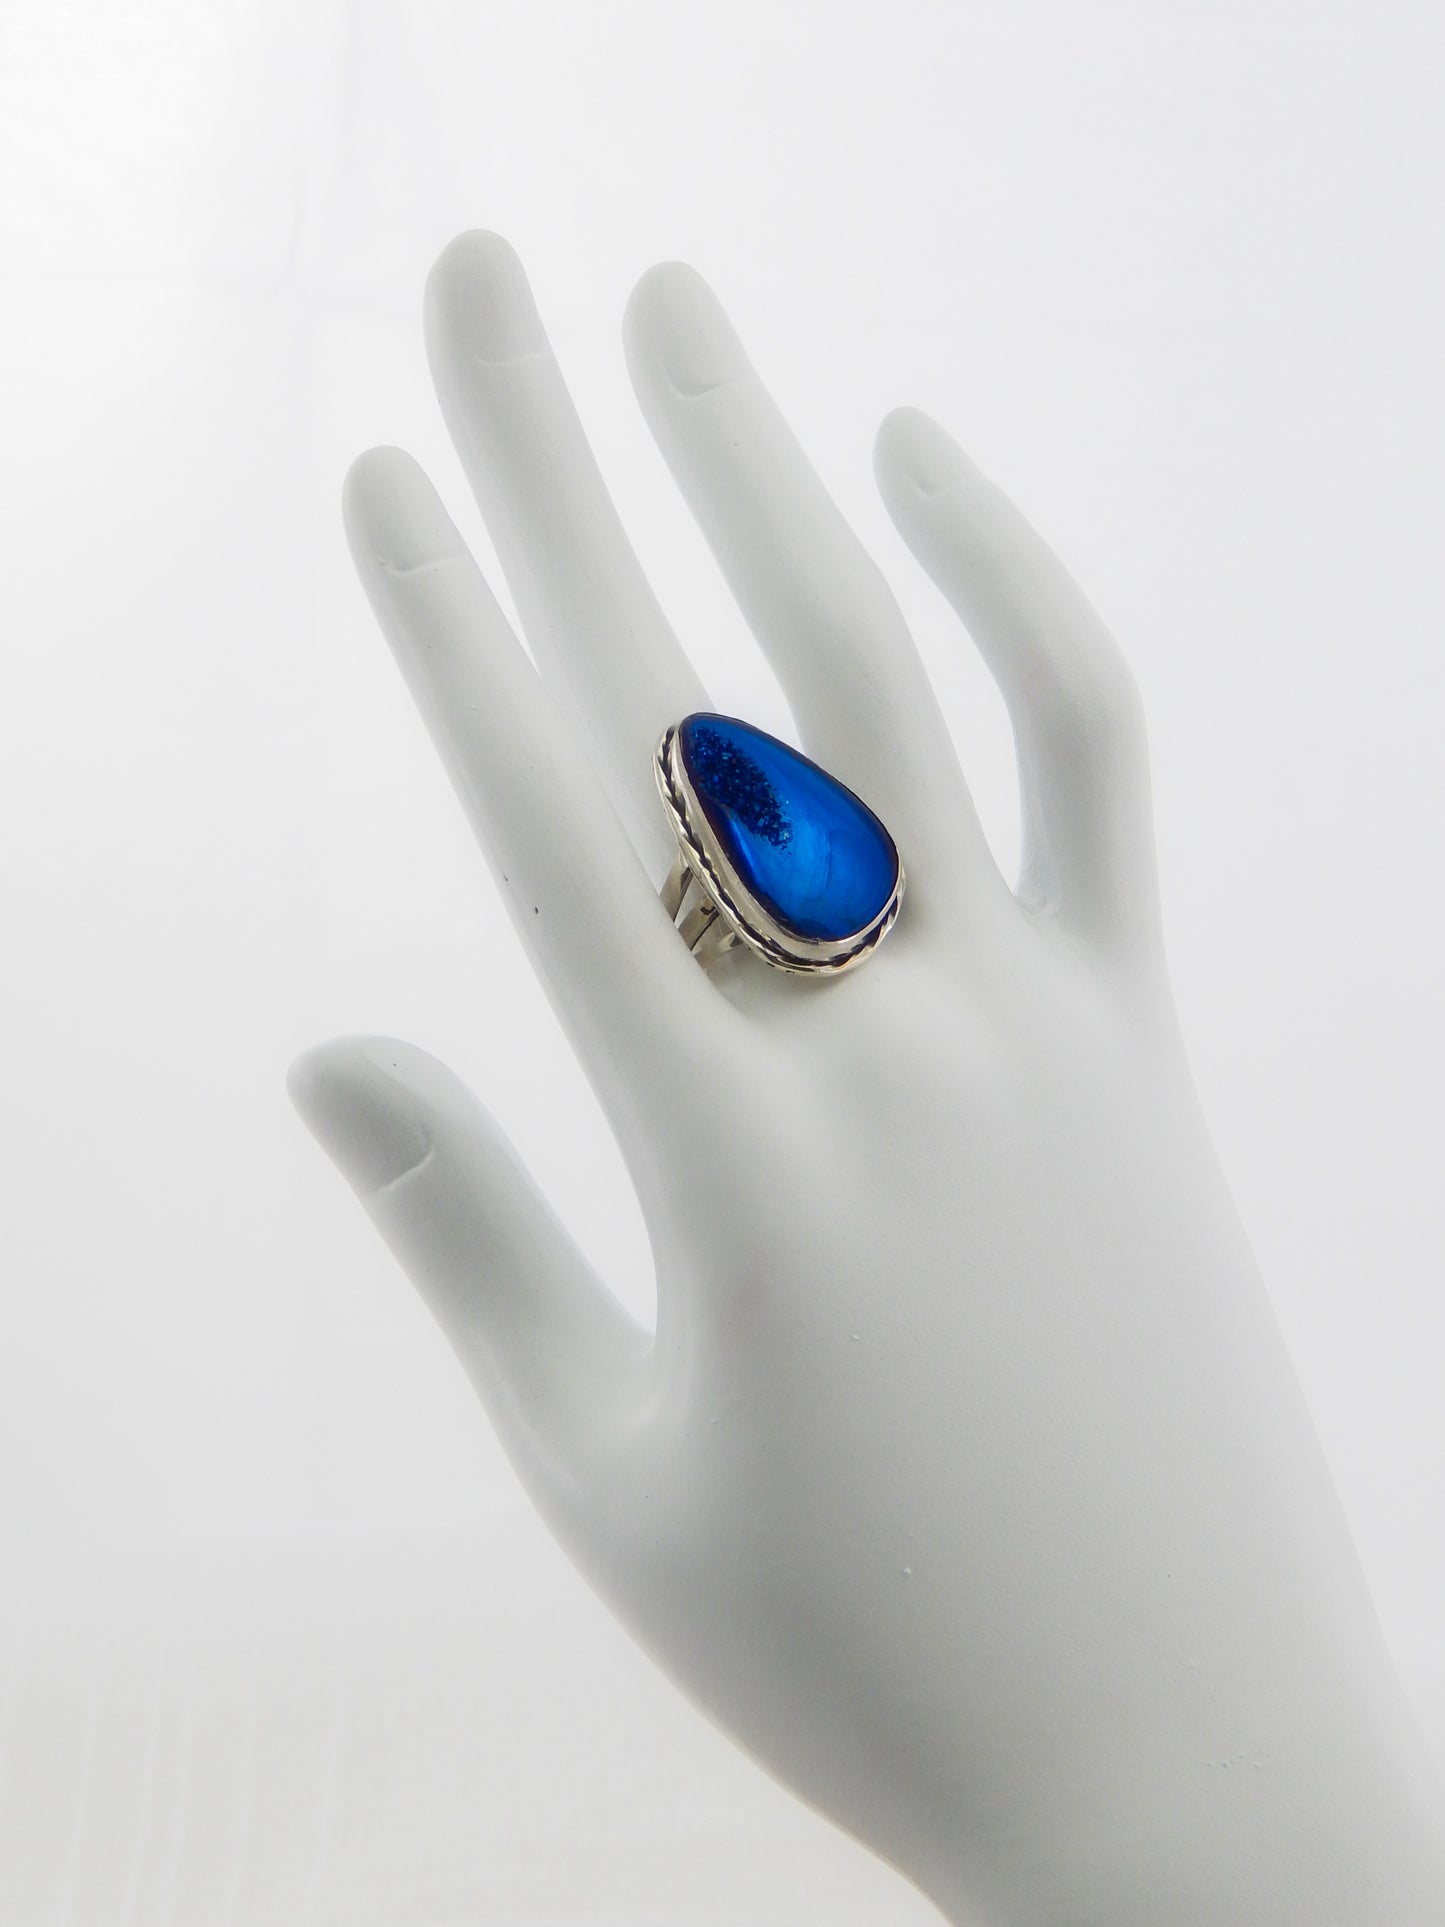 Genuine Hand Painted Royal Blue Druzy Ring in 925 Silver